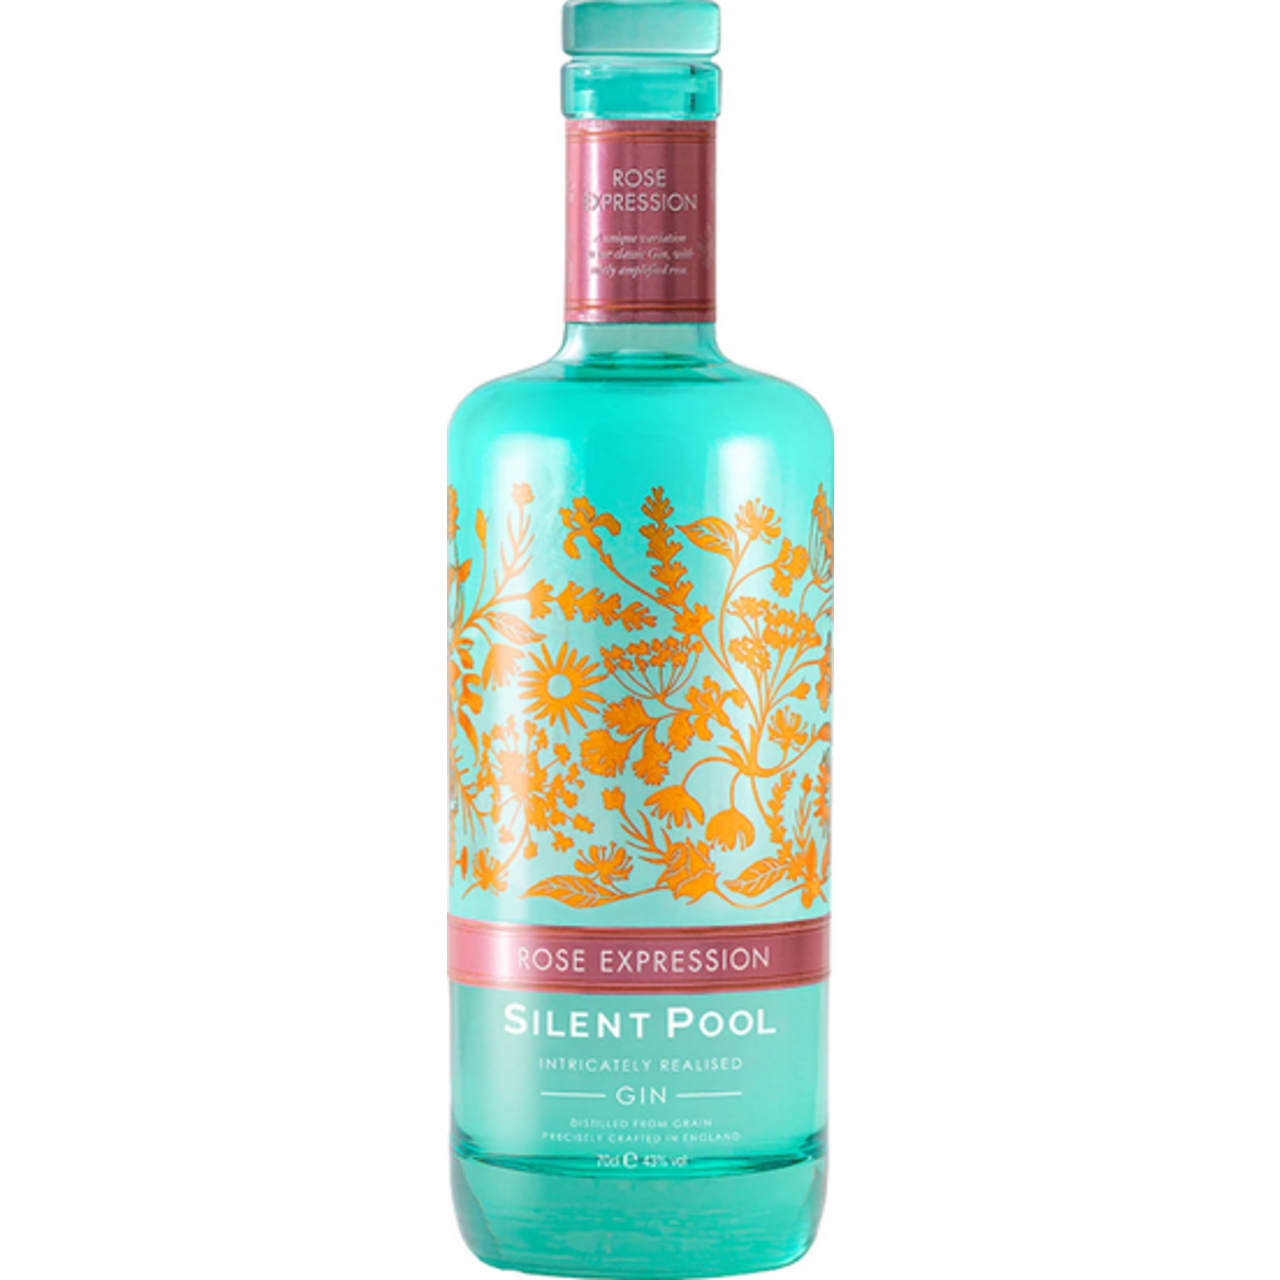 Product Image - Silent Pool Gin Rose Expression